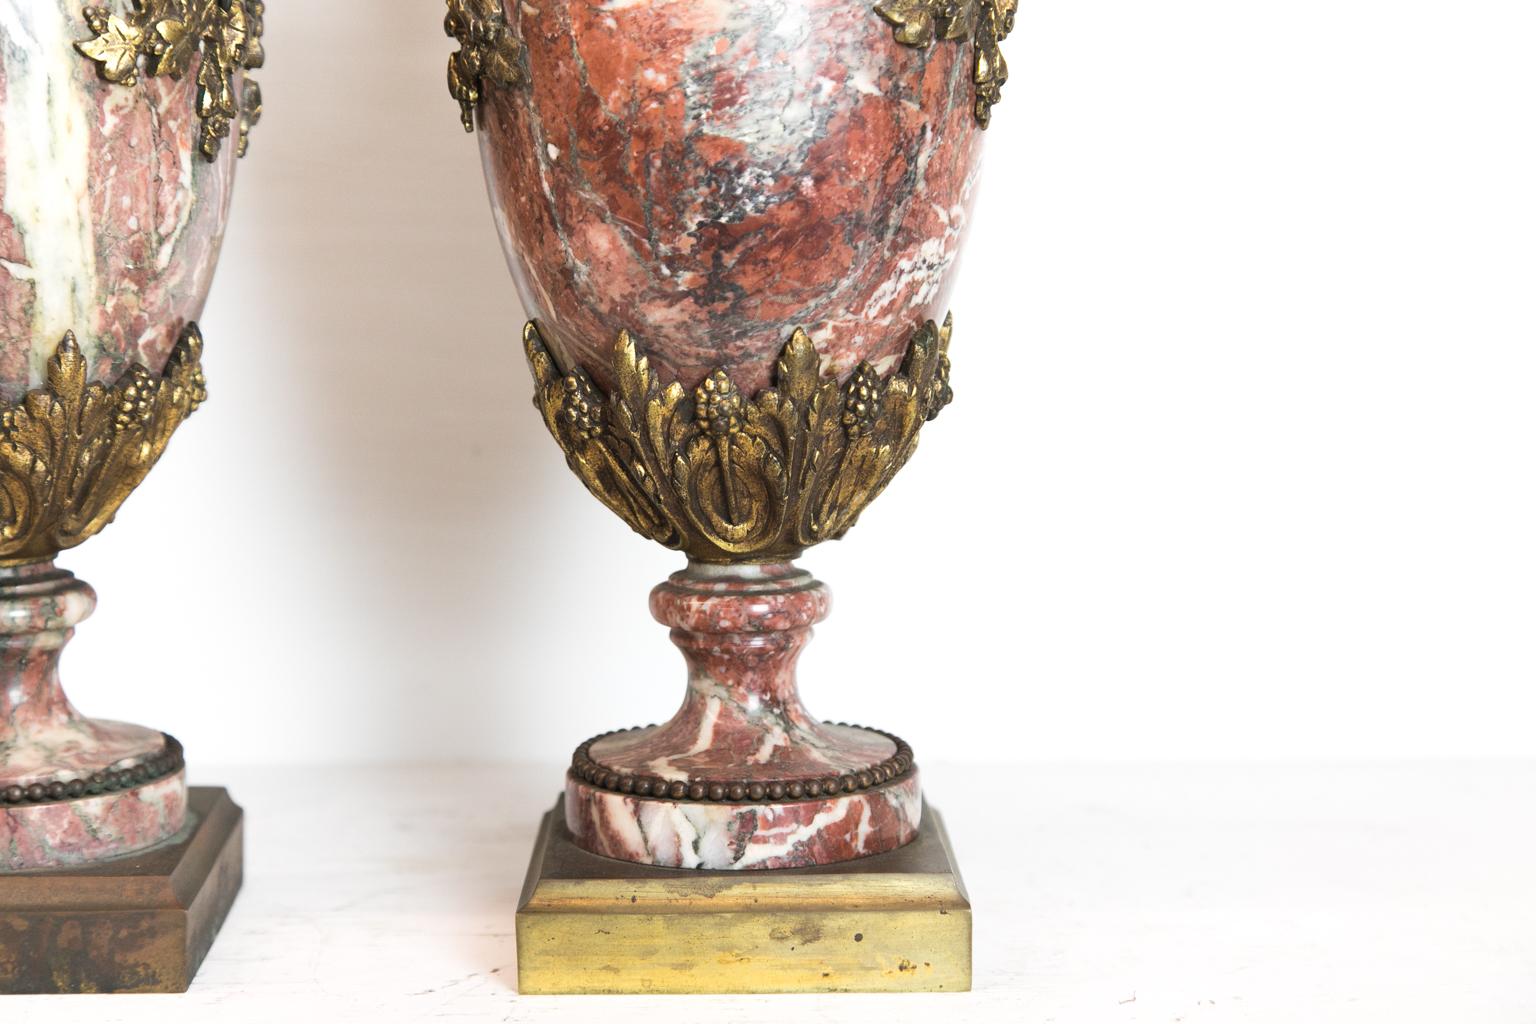 Pair of French marble and ormolu cassolettes, the removable lids have a pineapple finial, the top of the bases with a reticulated frieze, with twig and grapevine handles, and there is acanthus leaf and grape design on the base. The marble is a rojo